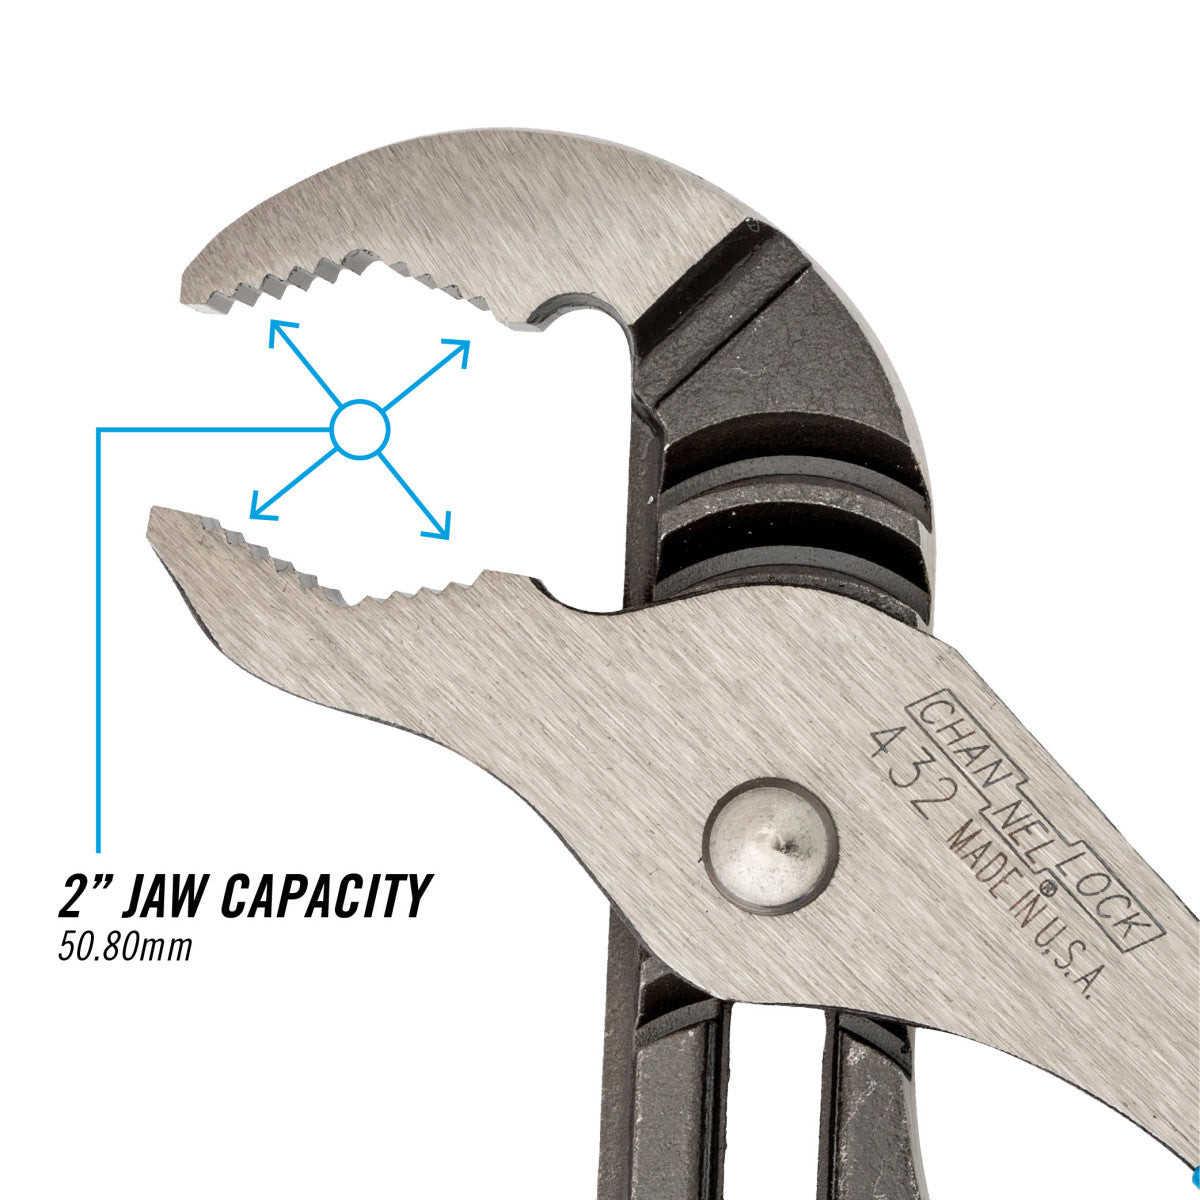 432 - 10" V-Jaw Tongue & Groove Pliers